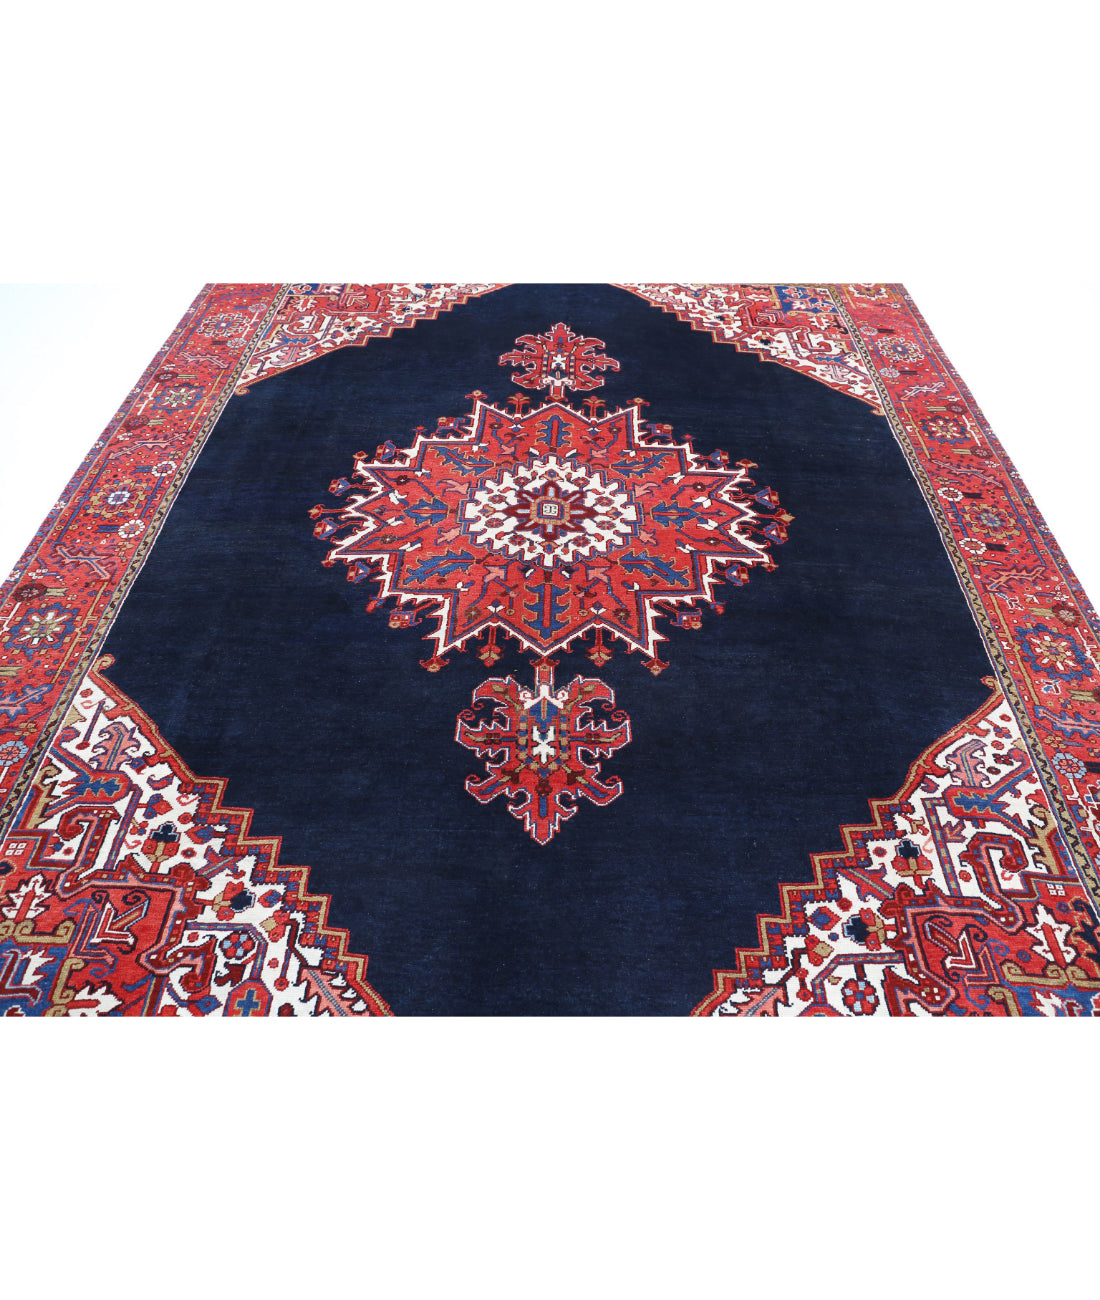 Hand Knotted Antique Persian Heriz Wool Rug - 8'10'' x 10'11'' 8'10'' x 10'11'' (265 X 328) / Blue / Red